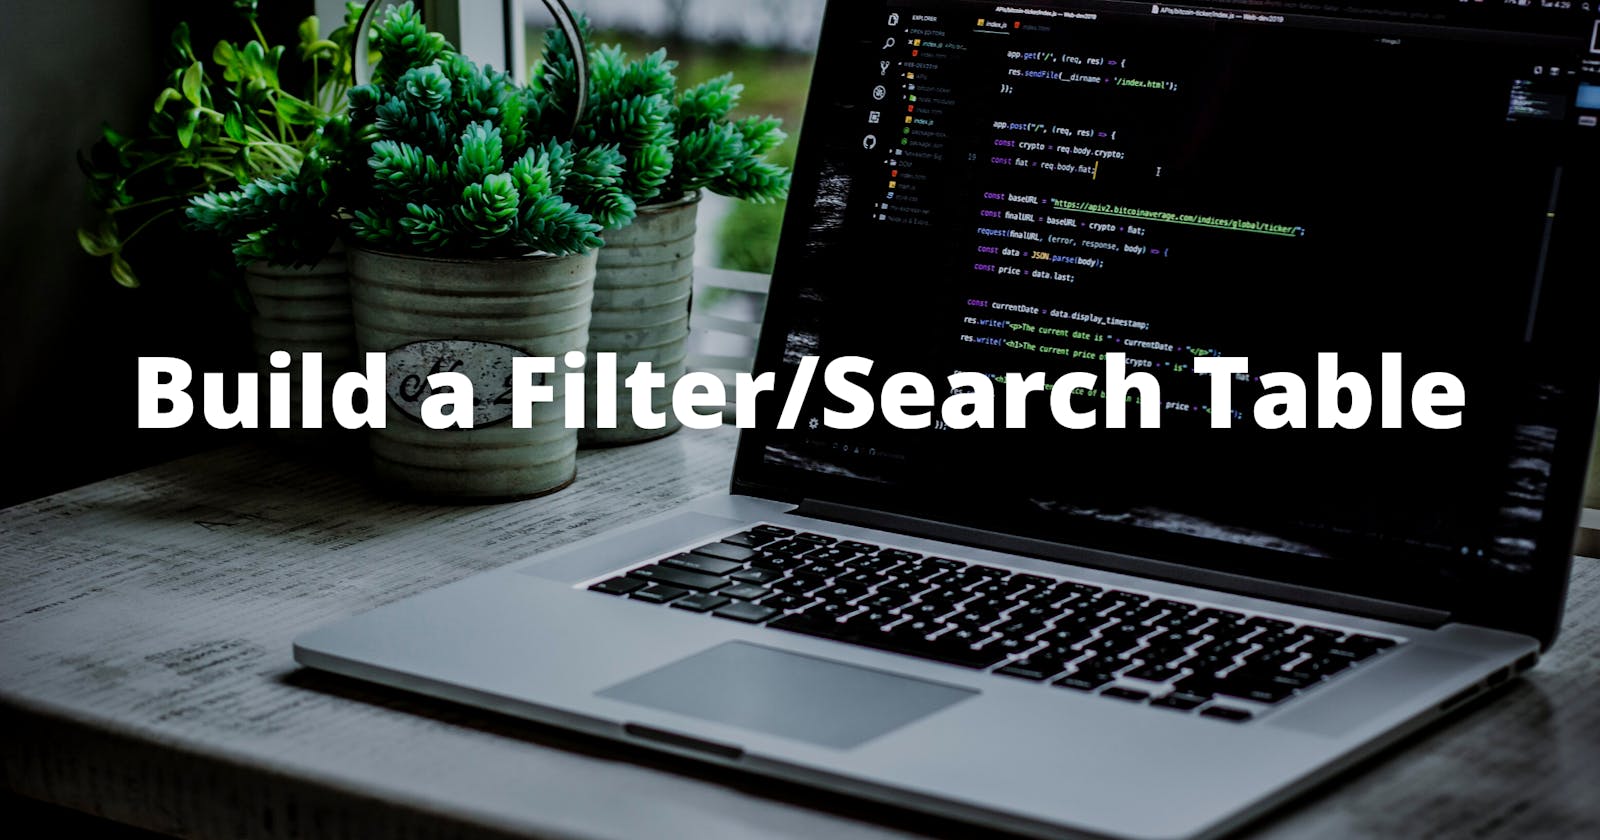 How to build a Filter/Search Table with HTML, CSS and JavaScript